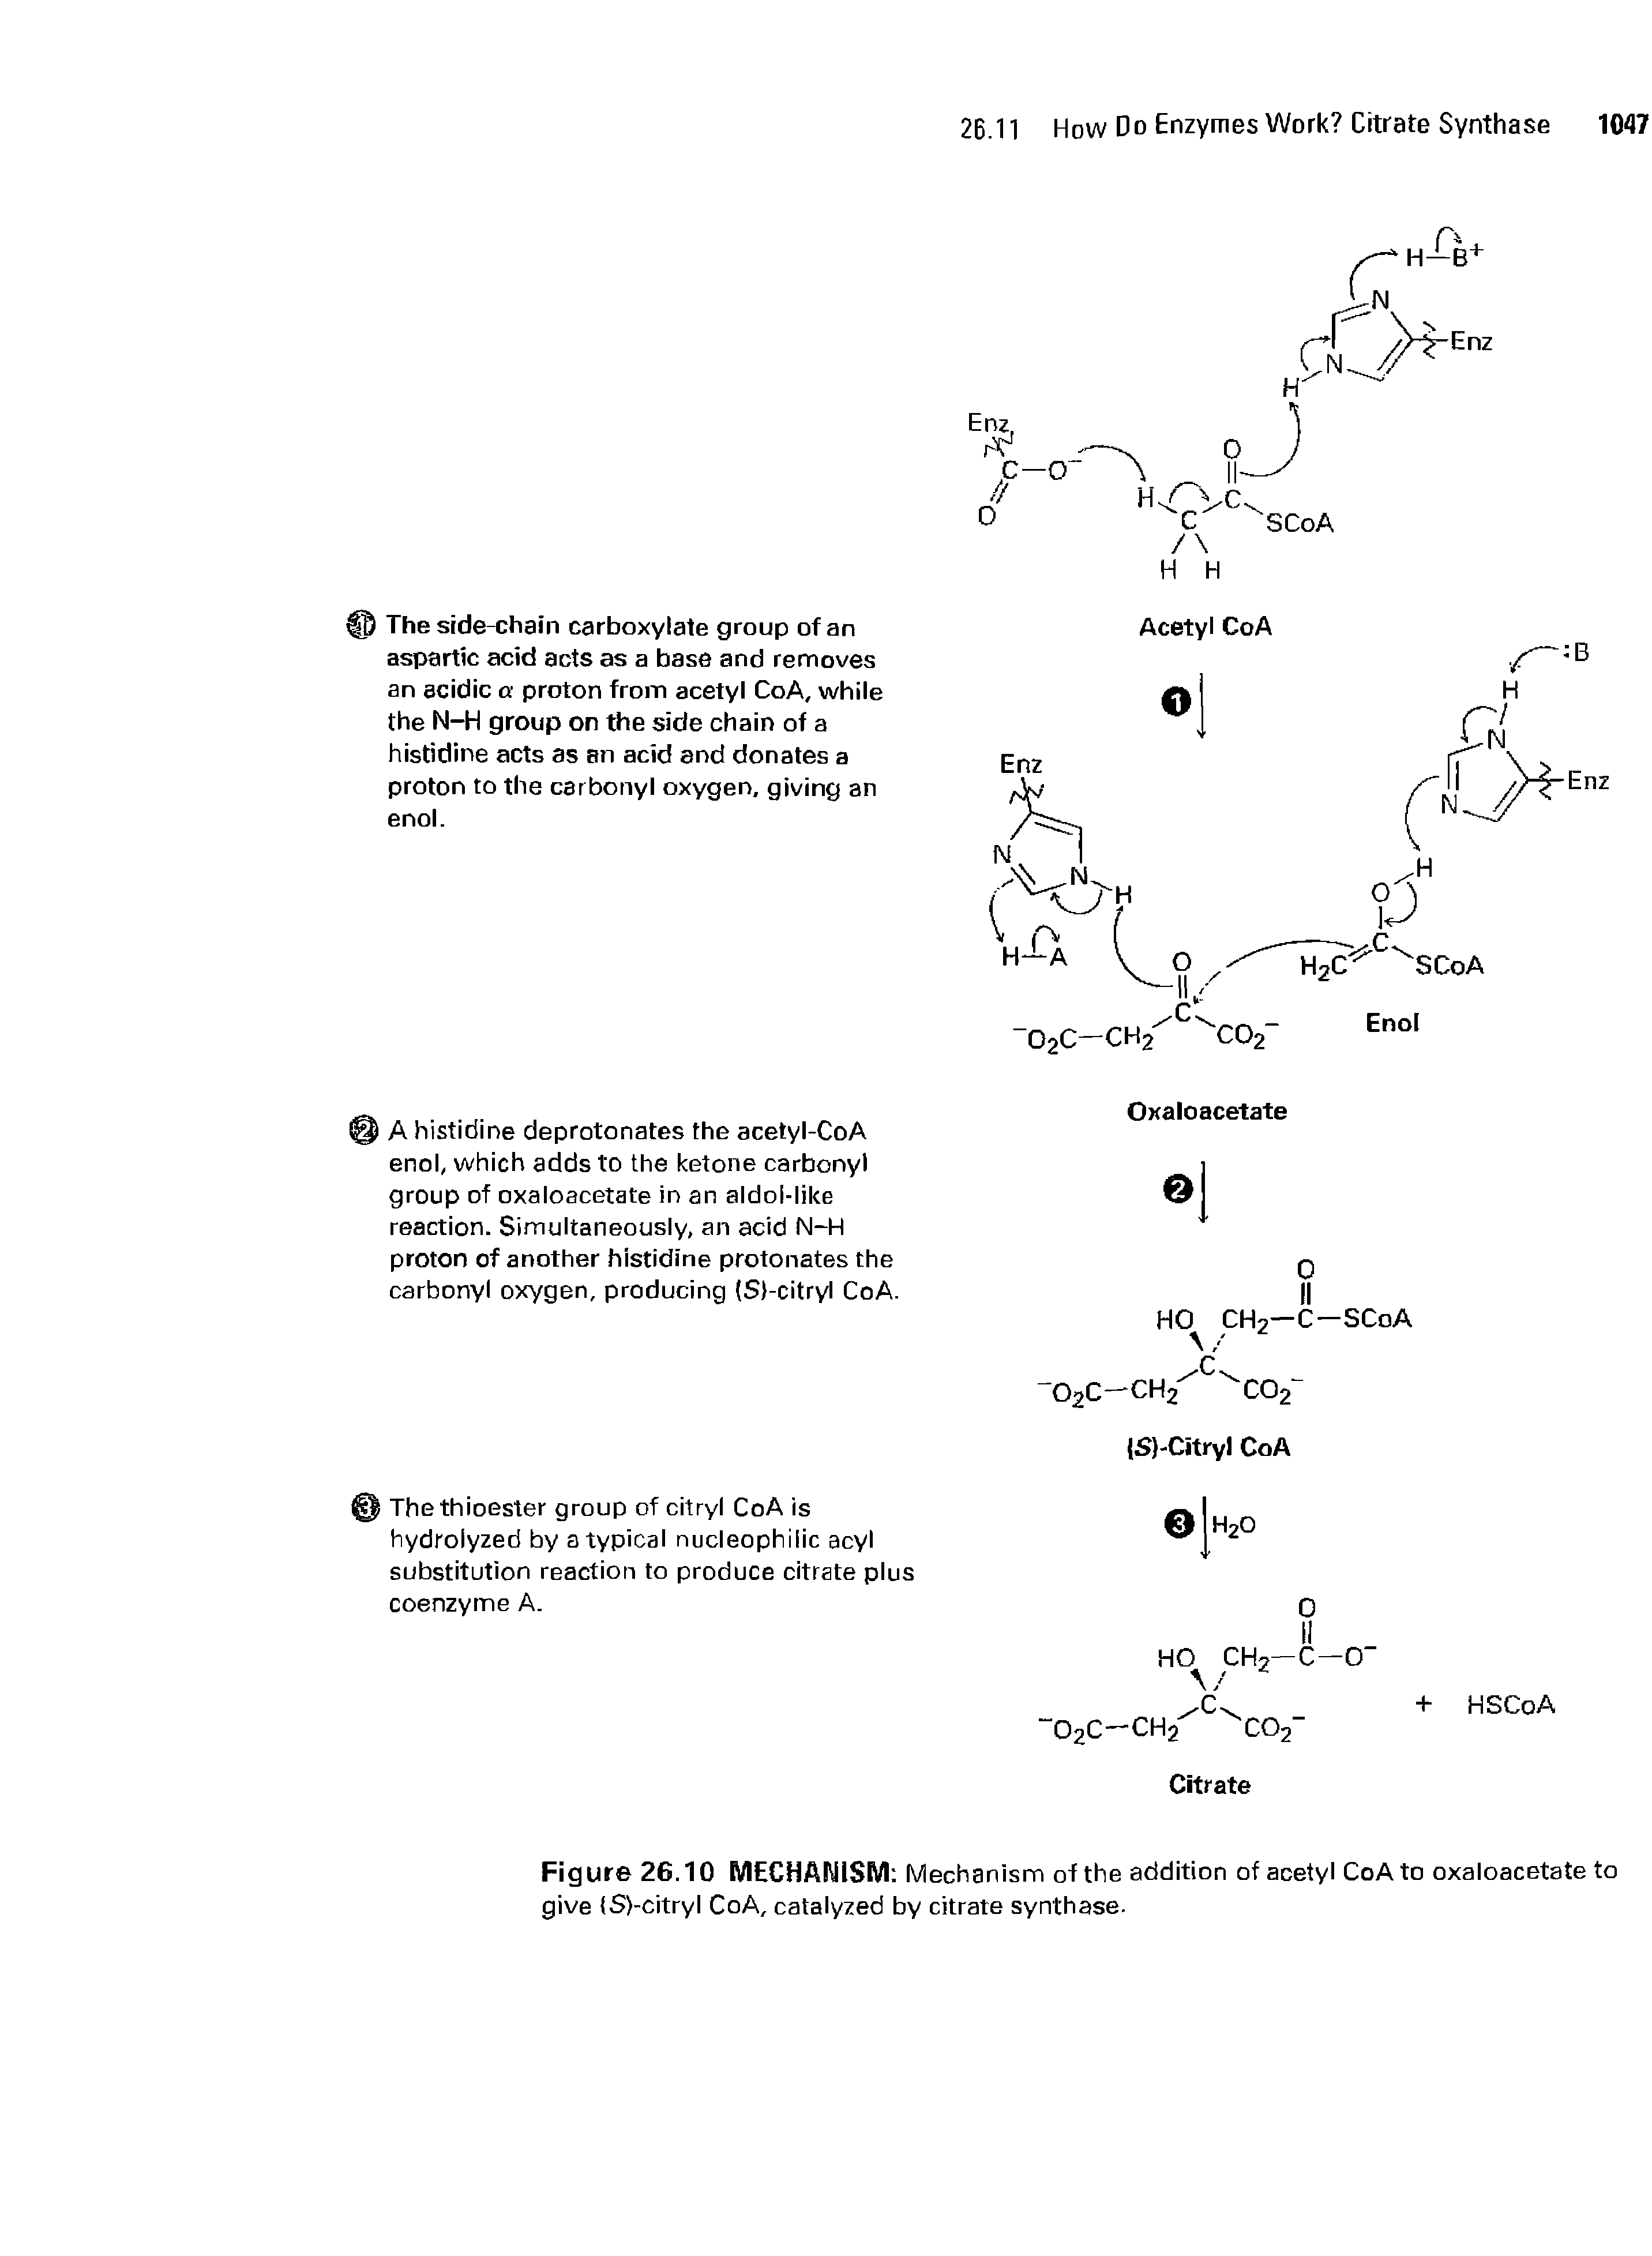 Figure 26.10 MECHANISM Mechanism of the addition of acetyl CoA to oxaloacetate to give (S)-citryl CoA, catalyzed by citrate synthase.